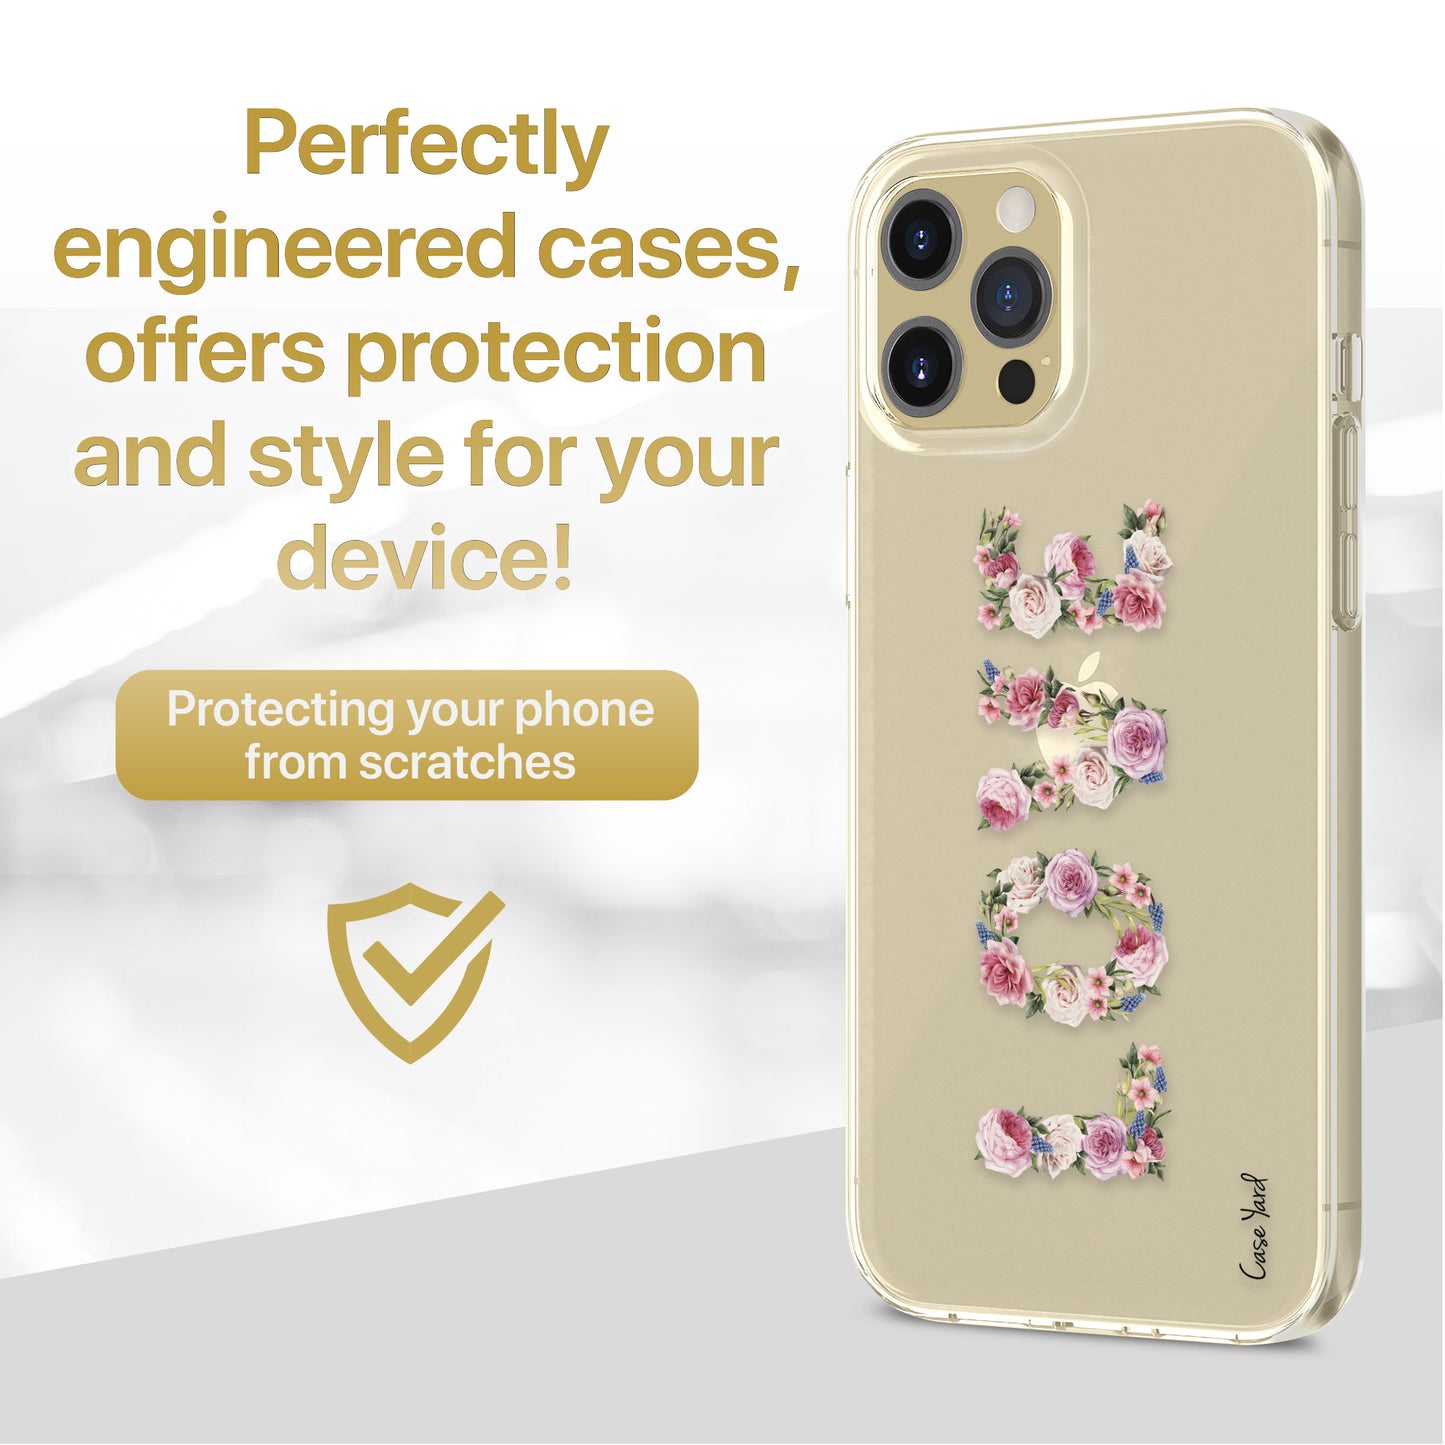 TPU Clear case with (Love Flower) Design for iPhone & Samsung Phones